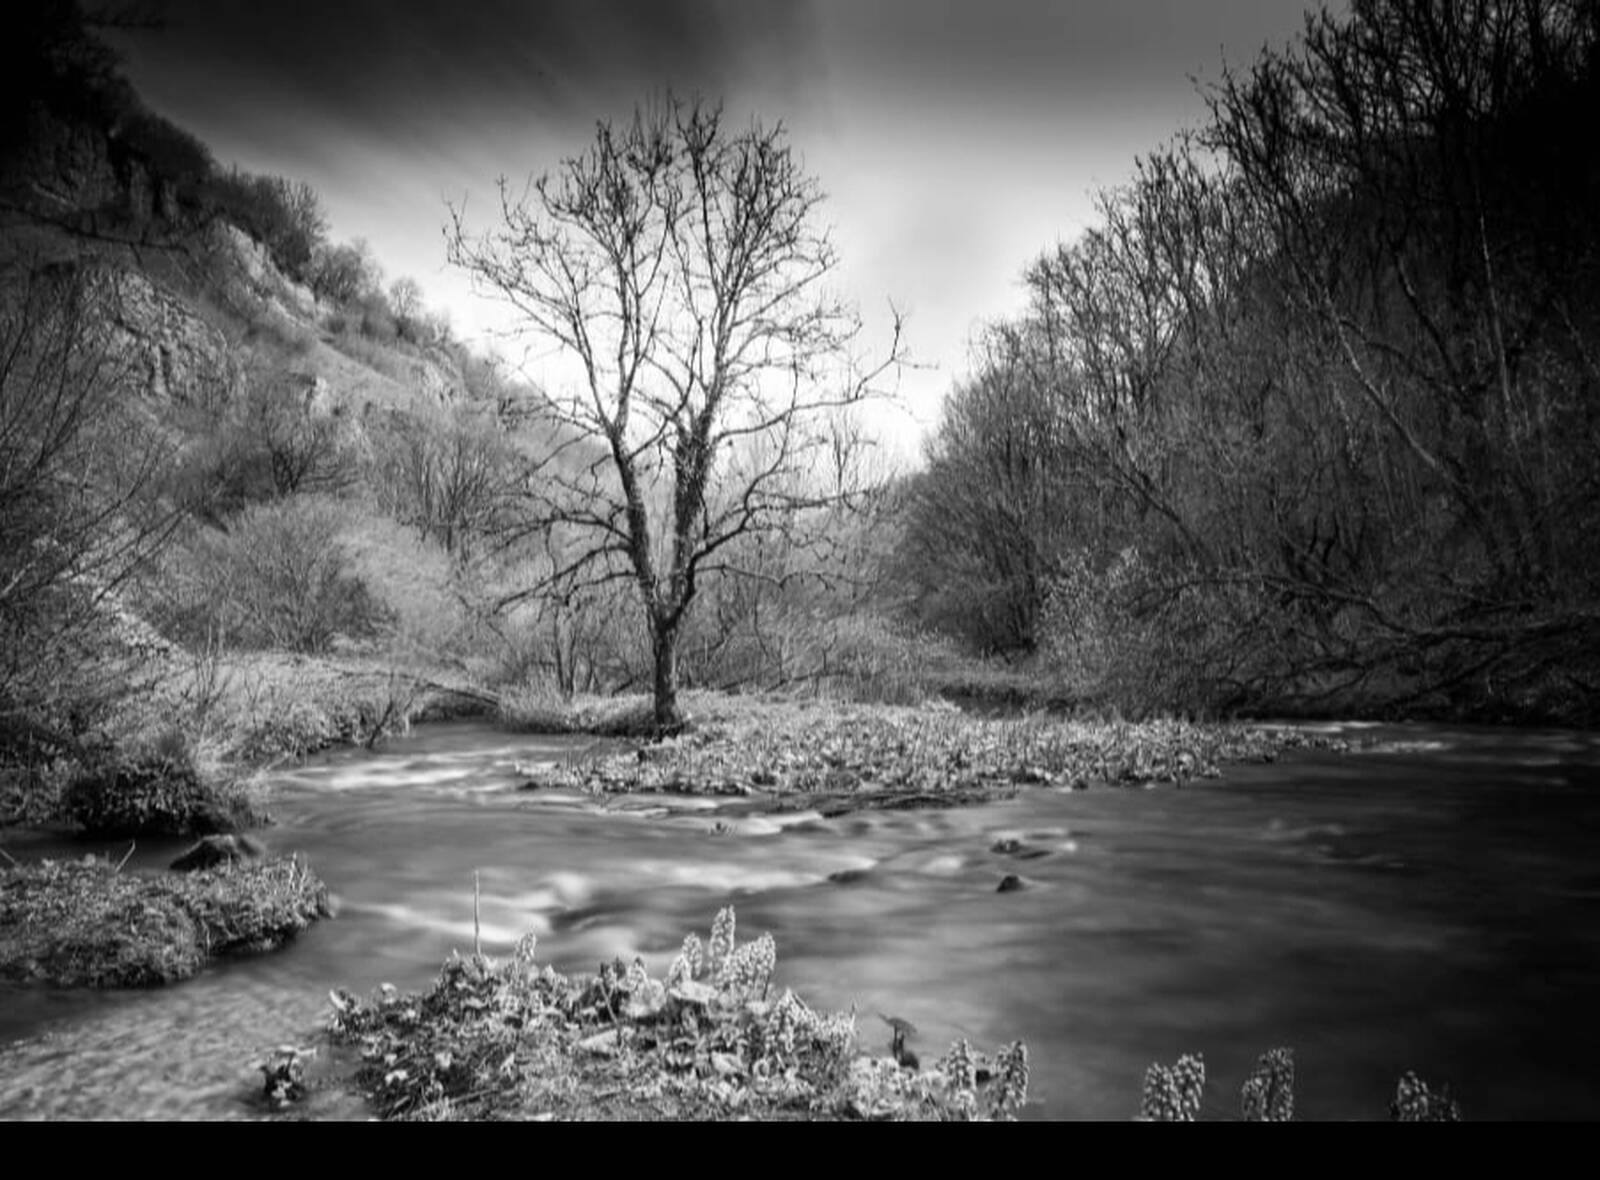 Image of Chee Dale by Nic Dunn